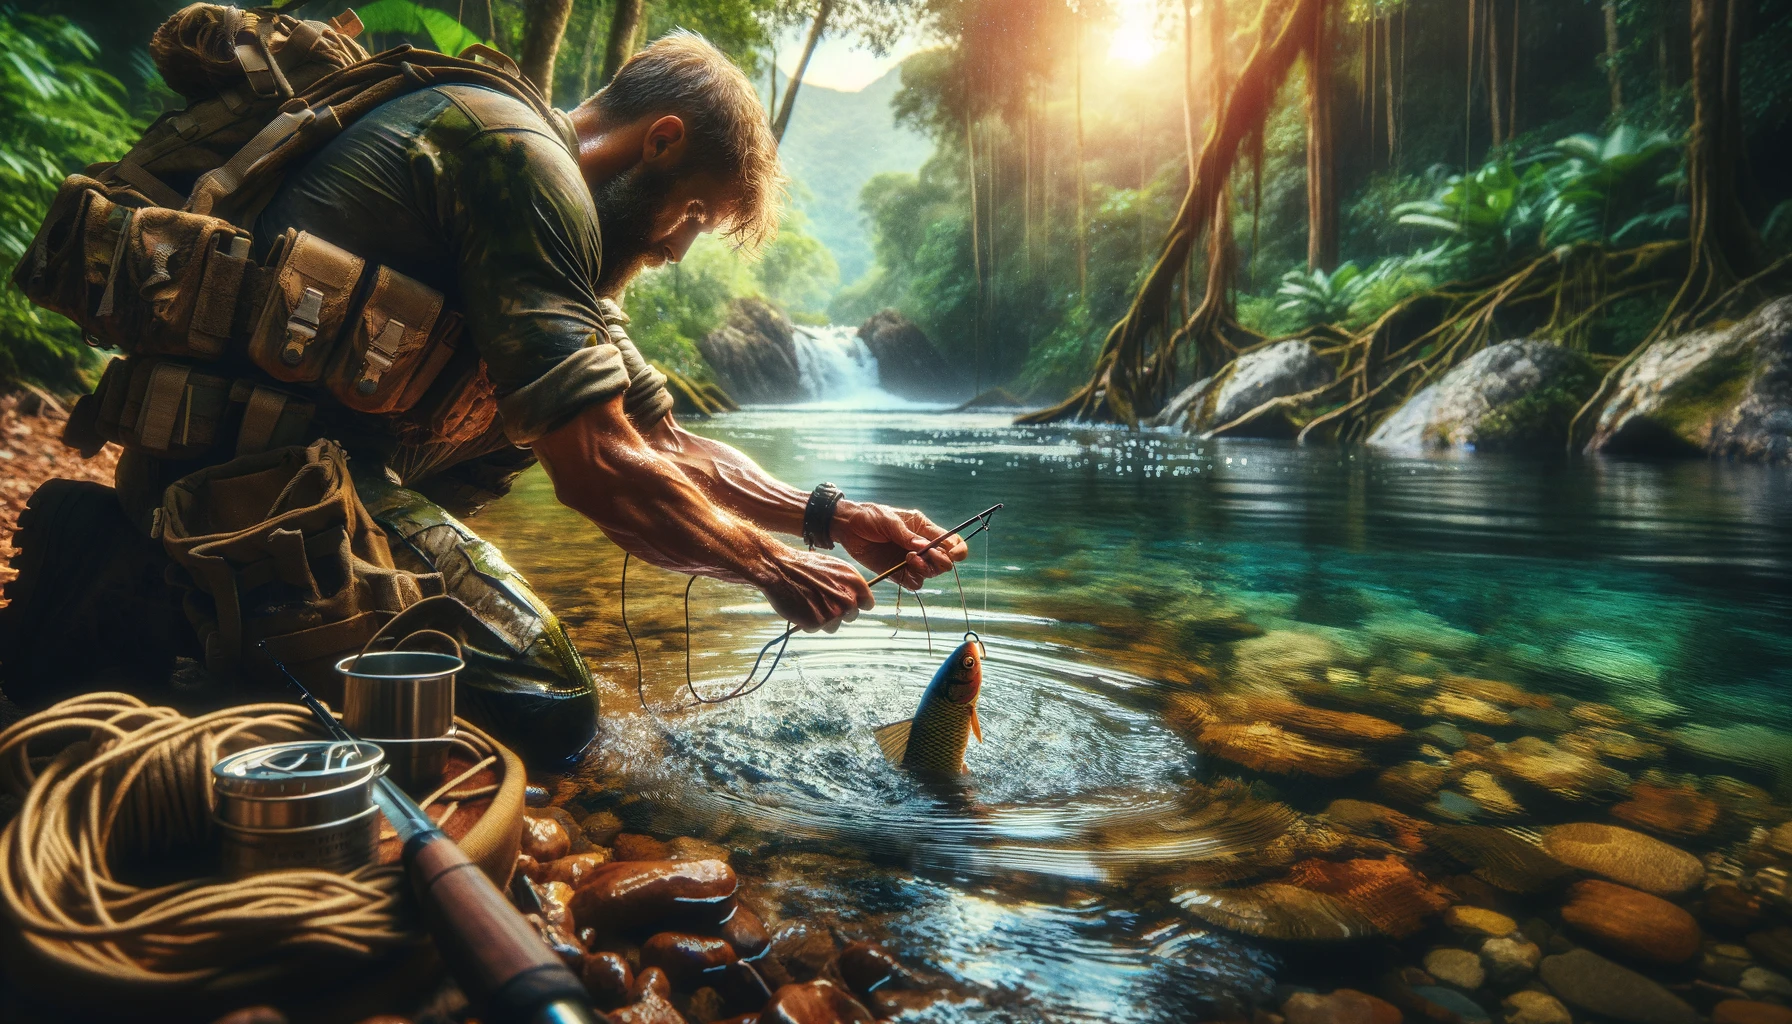 A dynamic and educational depiction of a survivalist mastering hand fishing and the use of gorge hooks in a natural water setting, showcasing the simplicity and efficiency of primitive fishing techniques. The image highlights the survivalist's hands engaging with nature, either catching a fish or setting up a gorge hook, against a backdrop of clear water and lush environment. This illustration emphasizes the importance of direct connection with nature and mastering self-reliance skills for survival enthusiasts and outdoor adventurers